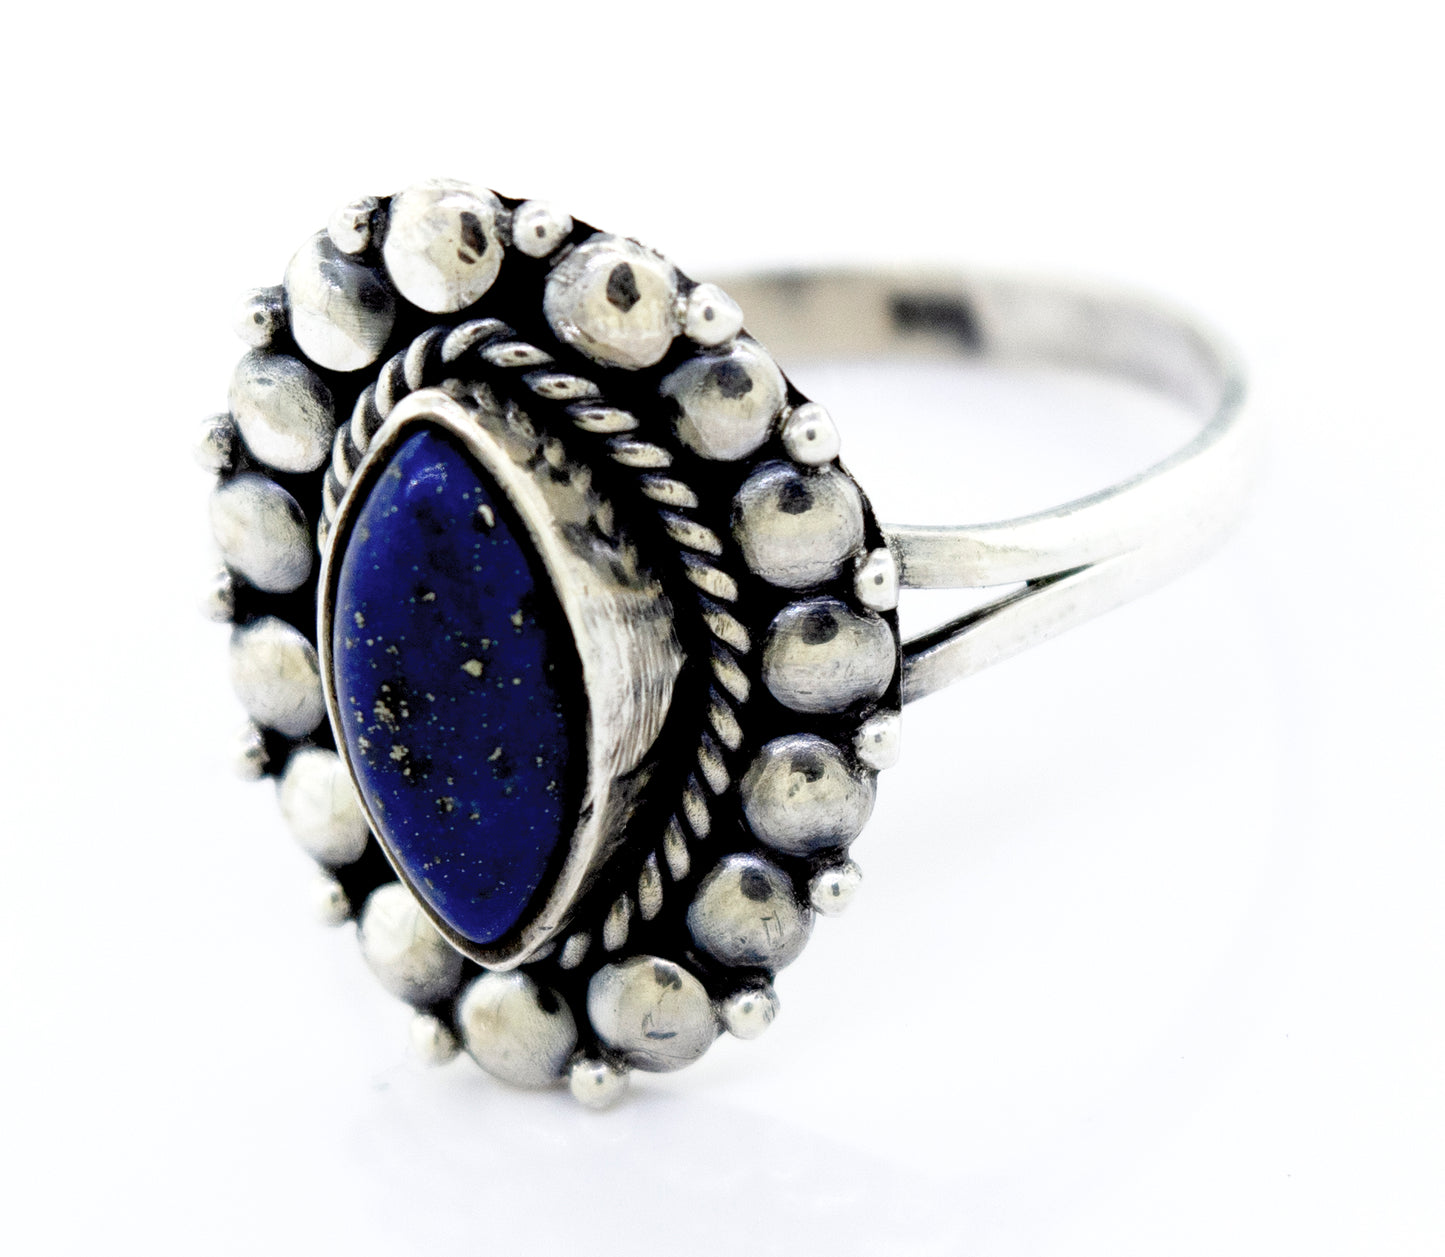 A Marquise Shaped Vibrant Lapis Ring by Super Silver, with the lapis stone in the center, featuring a beaded design in the silver setting.